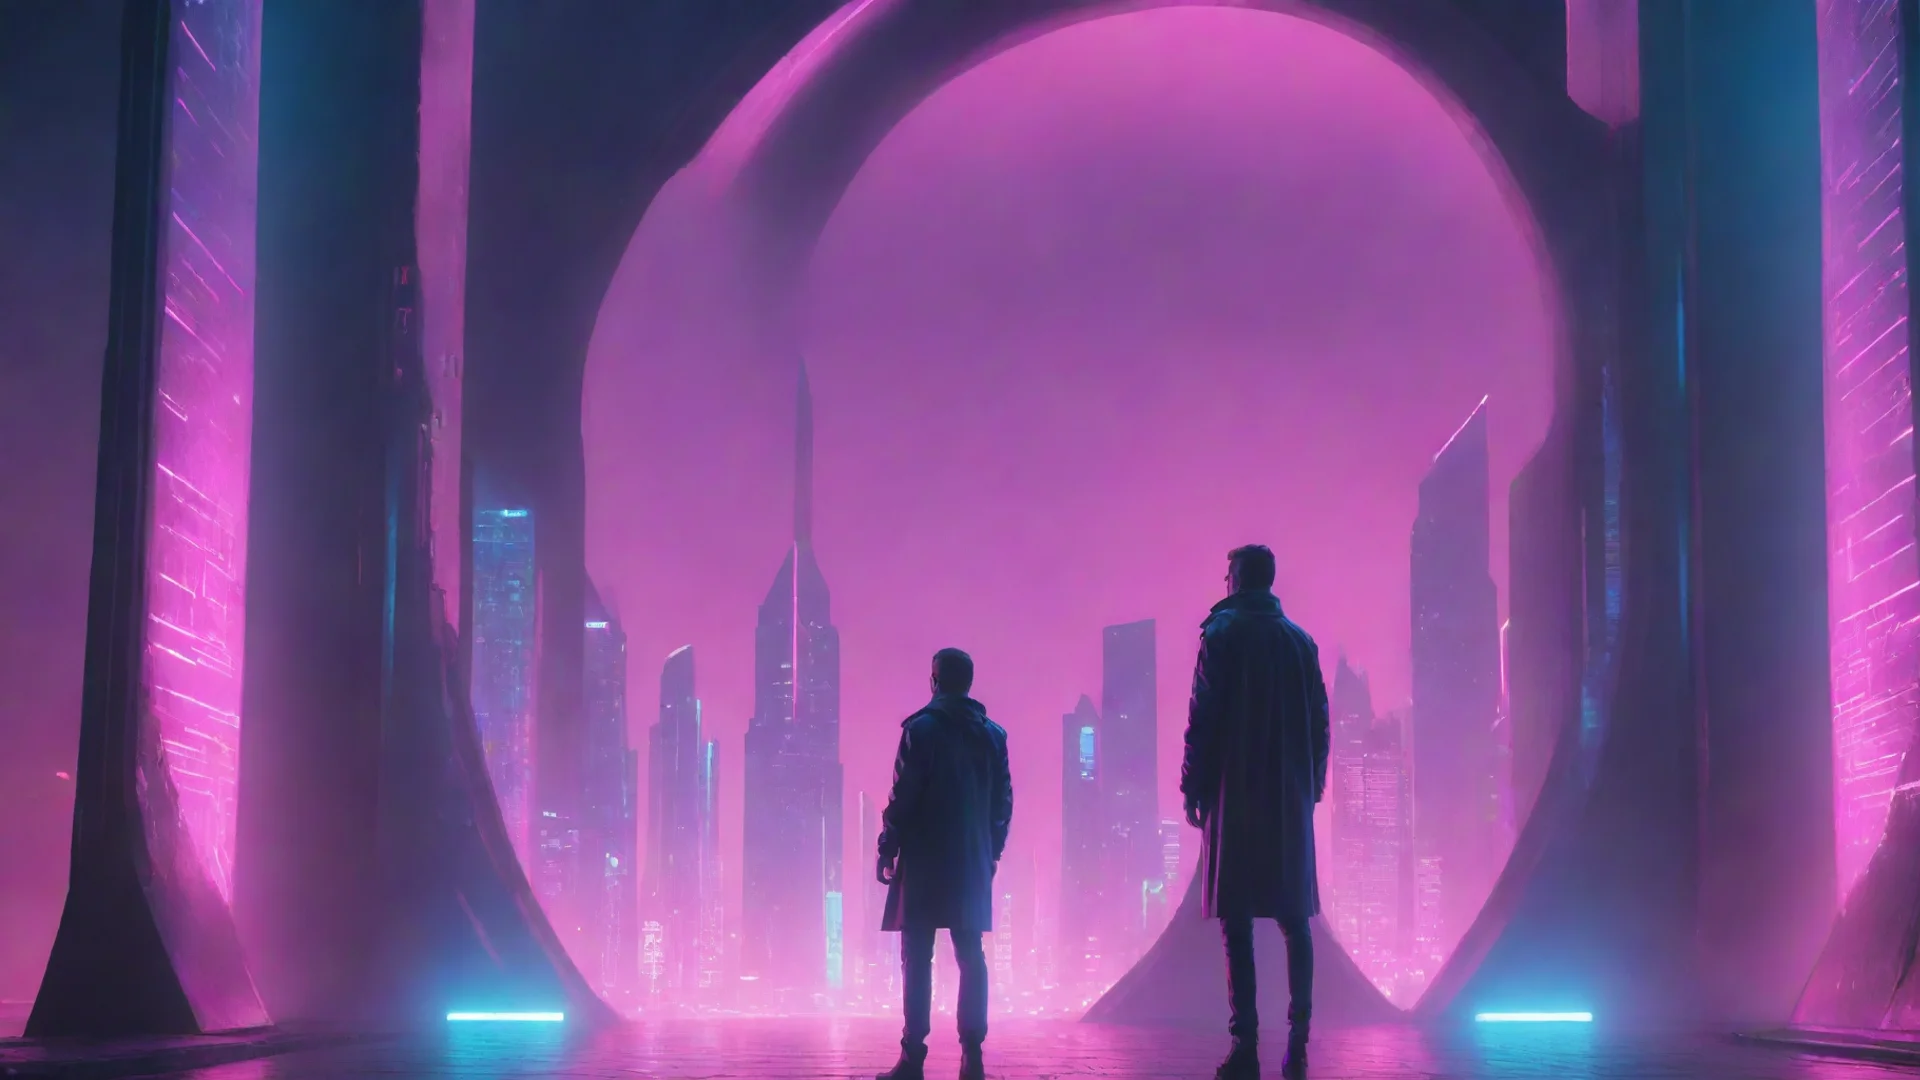 aisynthwave of a man standing behind the portal of the futuristic city wide